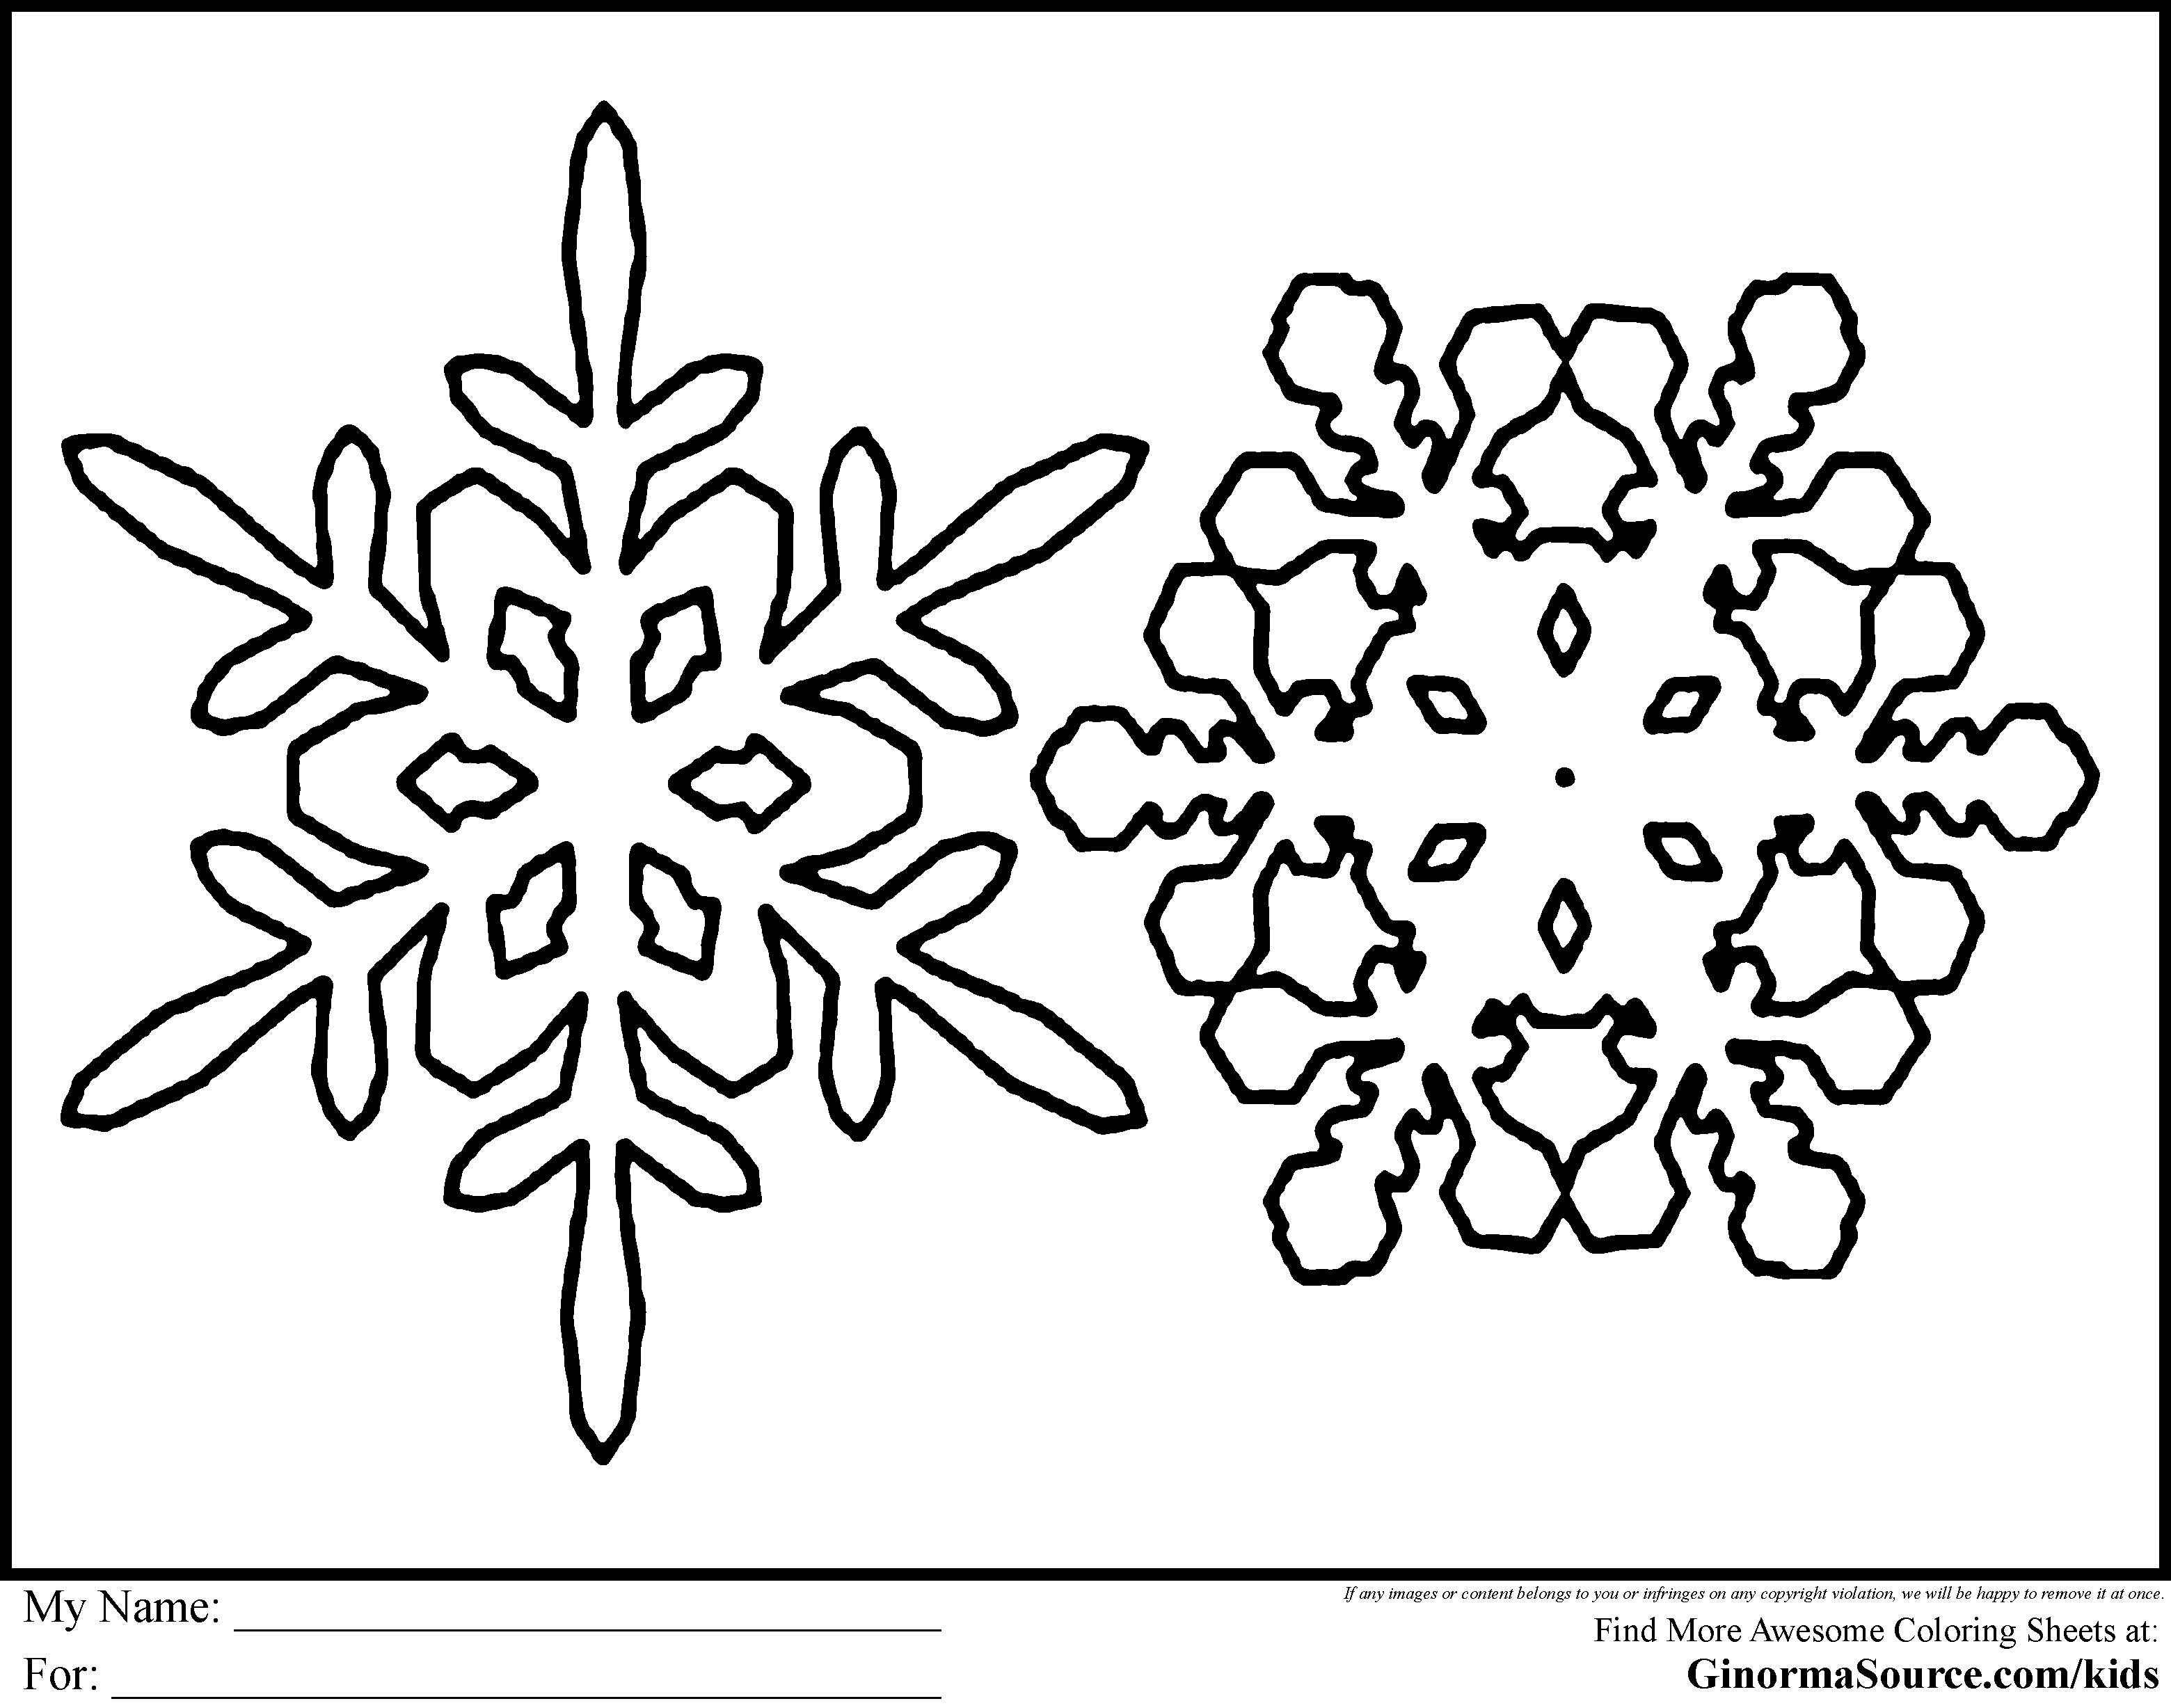 Related Snowflake Coloring Pages item-2736, Snowflake Coloring ...